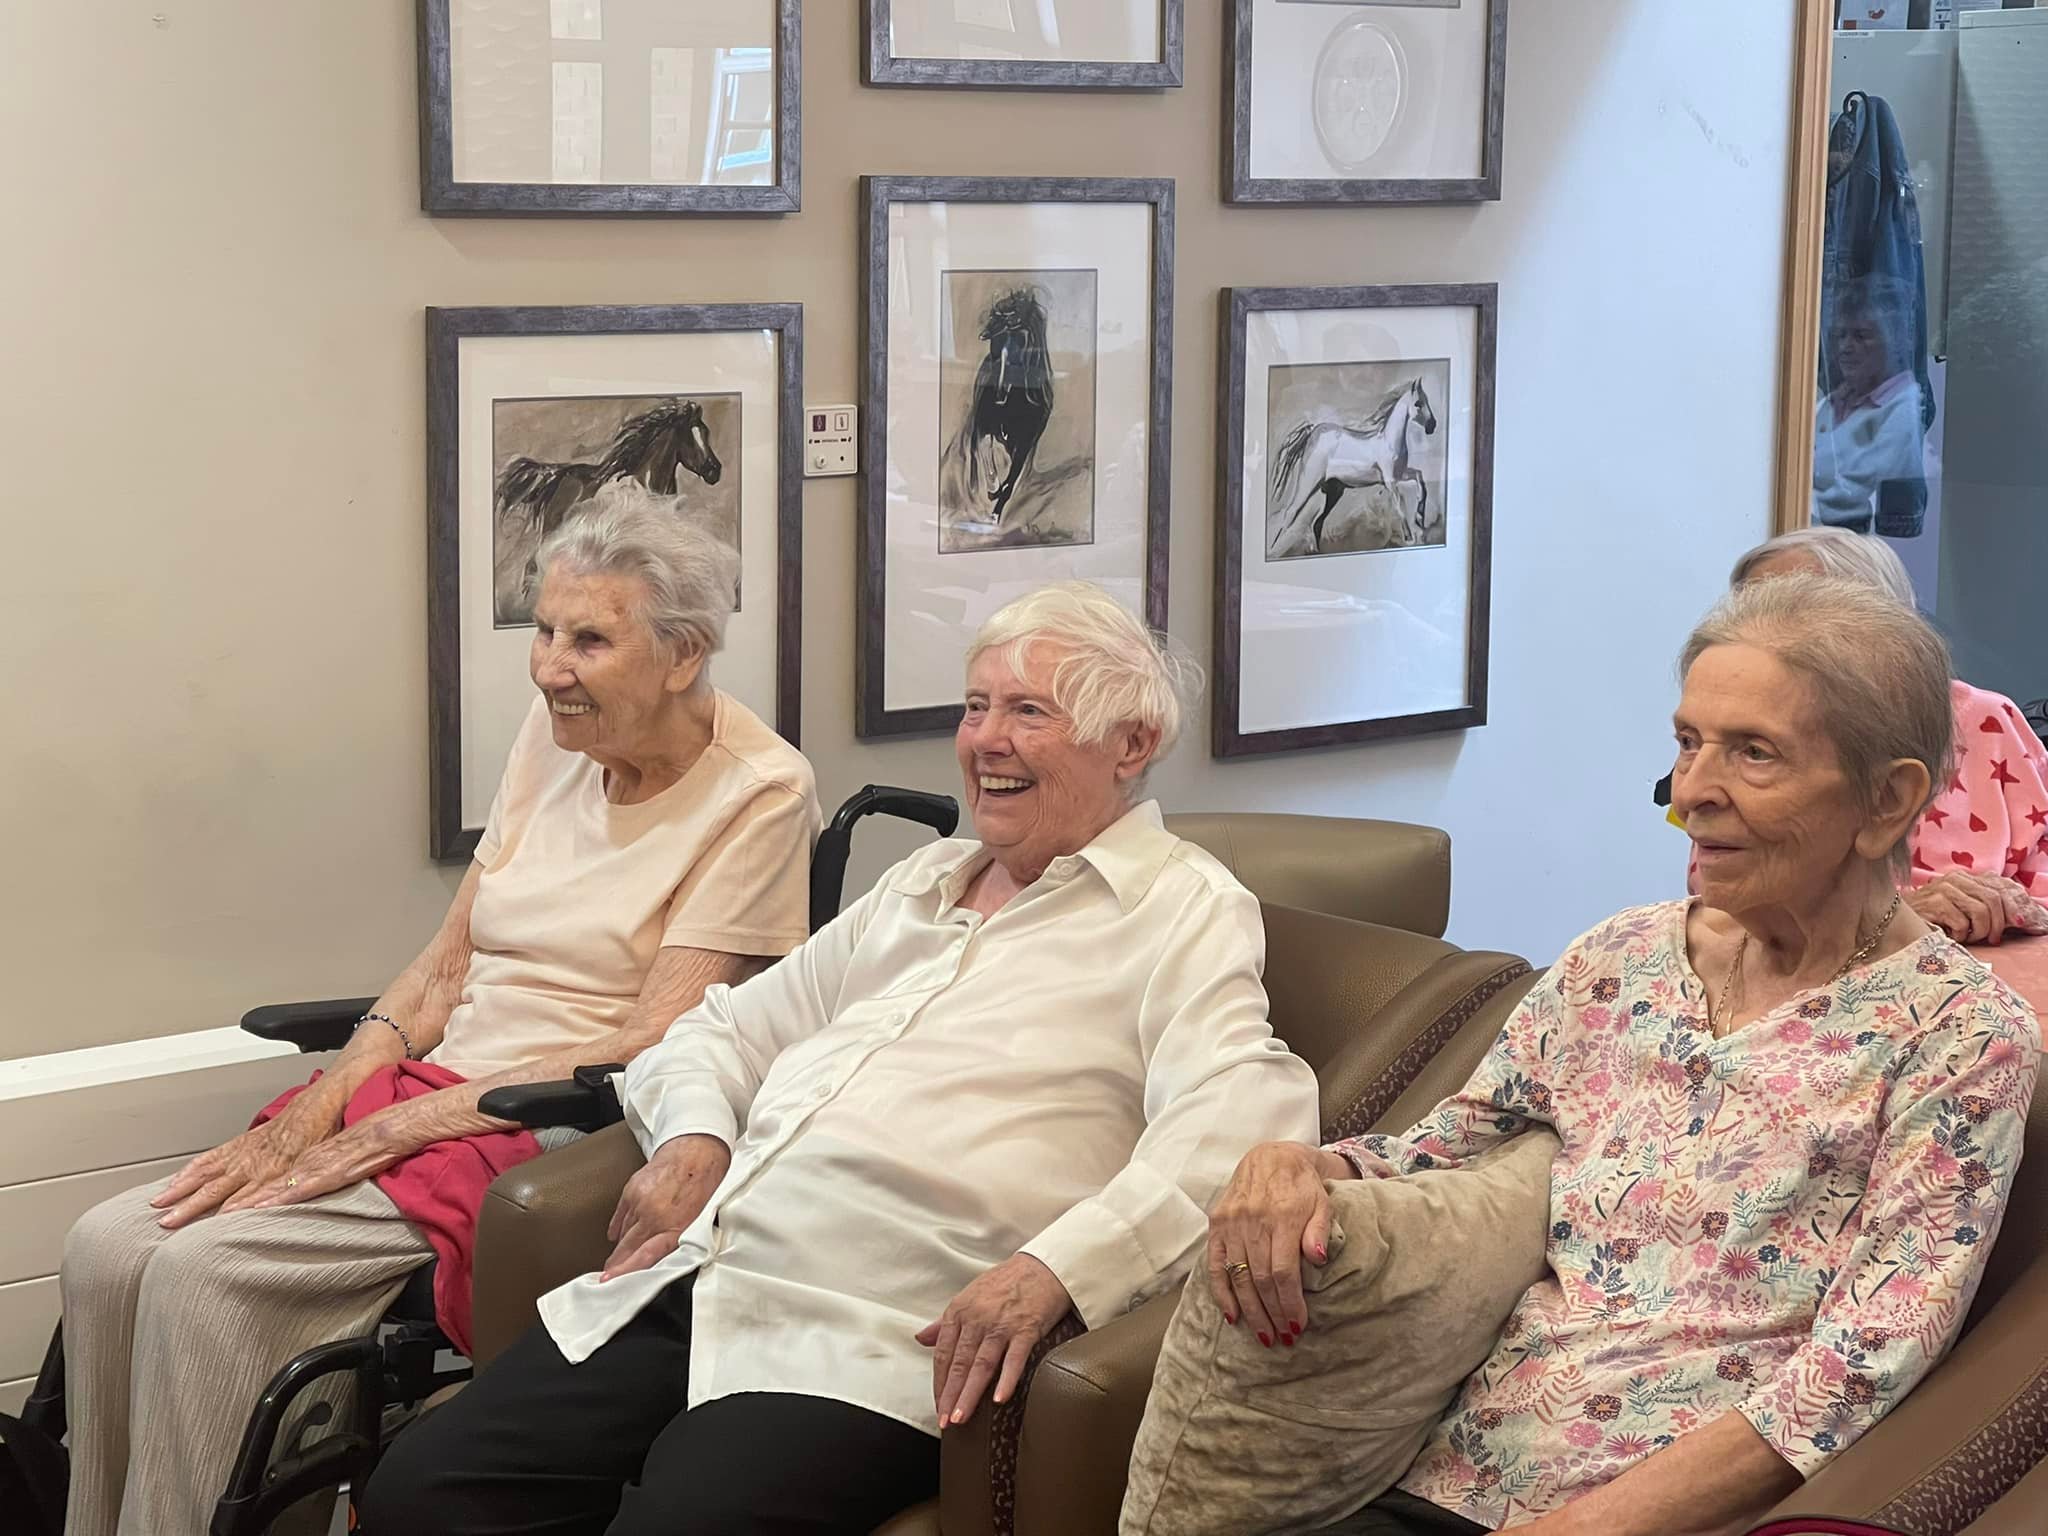 Residents in Armchairs Enjoying Entertainment